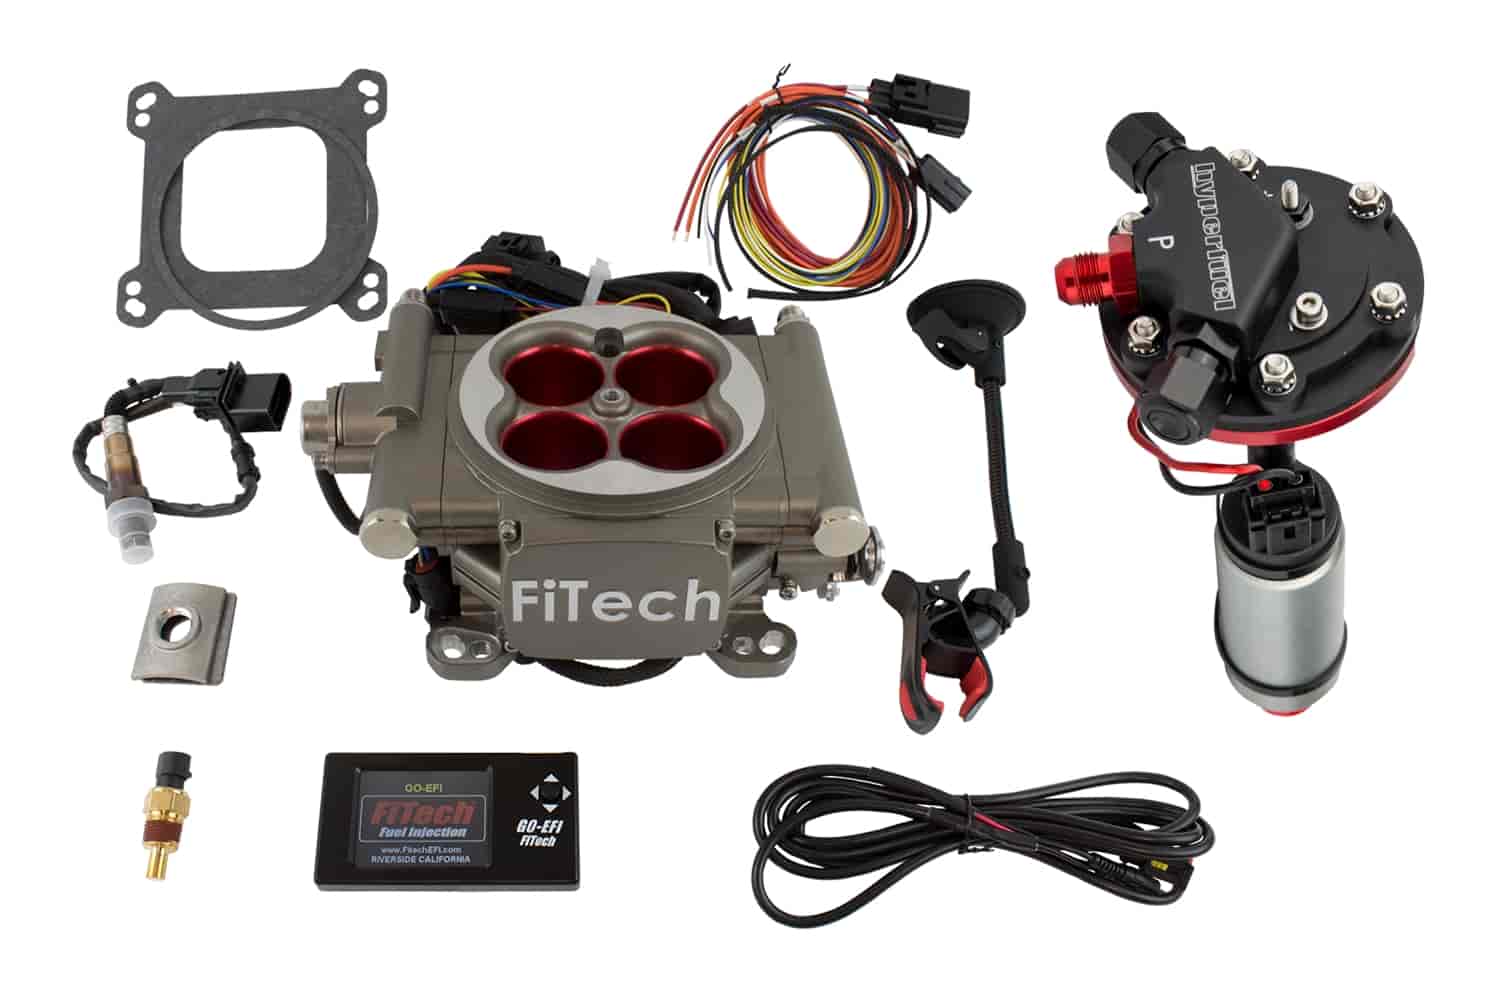 GoStreet EFI 400 HP Throttle Body System Master Kit Includes: Hy-Fuel Tight-Fit In-Tank Retrofit Kit